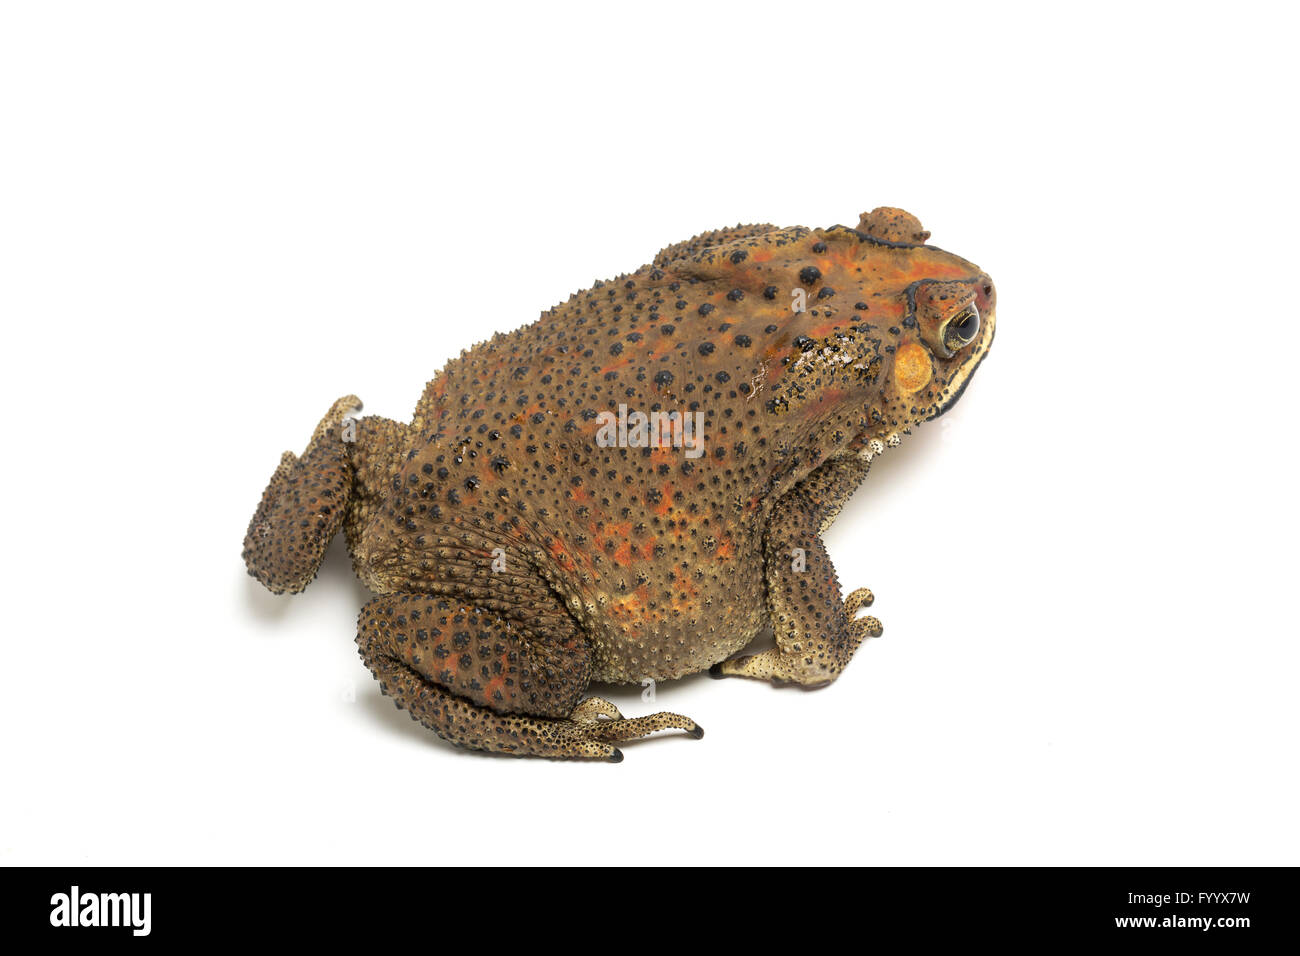 Black-spined Toad, Asian Common Toad, or Asian Toad, Duttaphrynus melanostictus, SE Asia (captive). Formerly Bufo melanostictus. Stock Photo